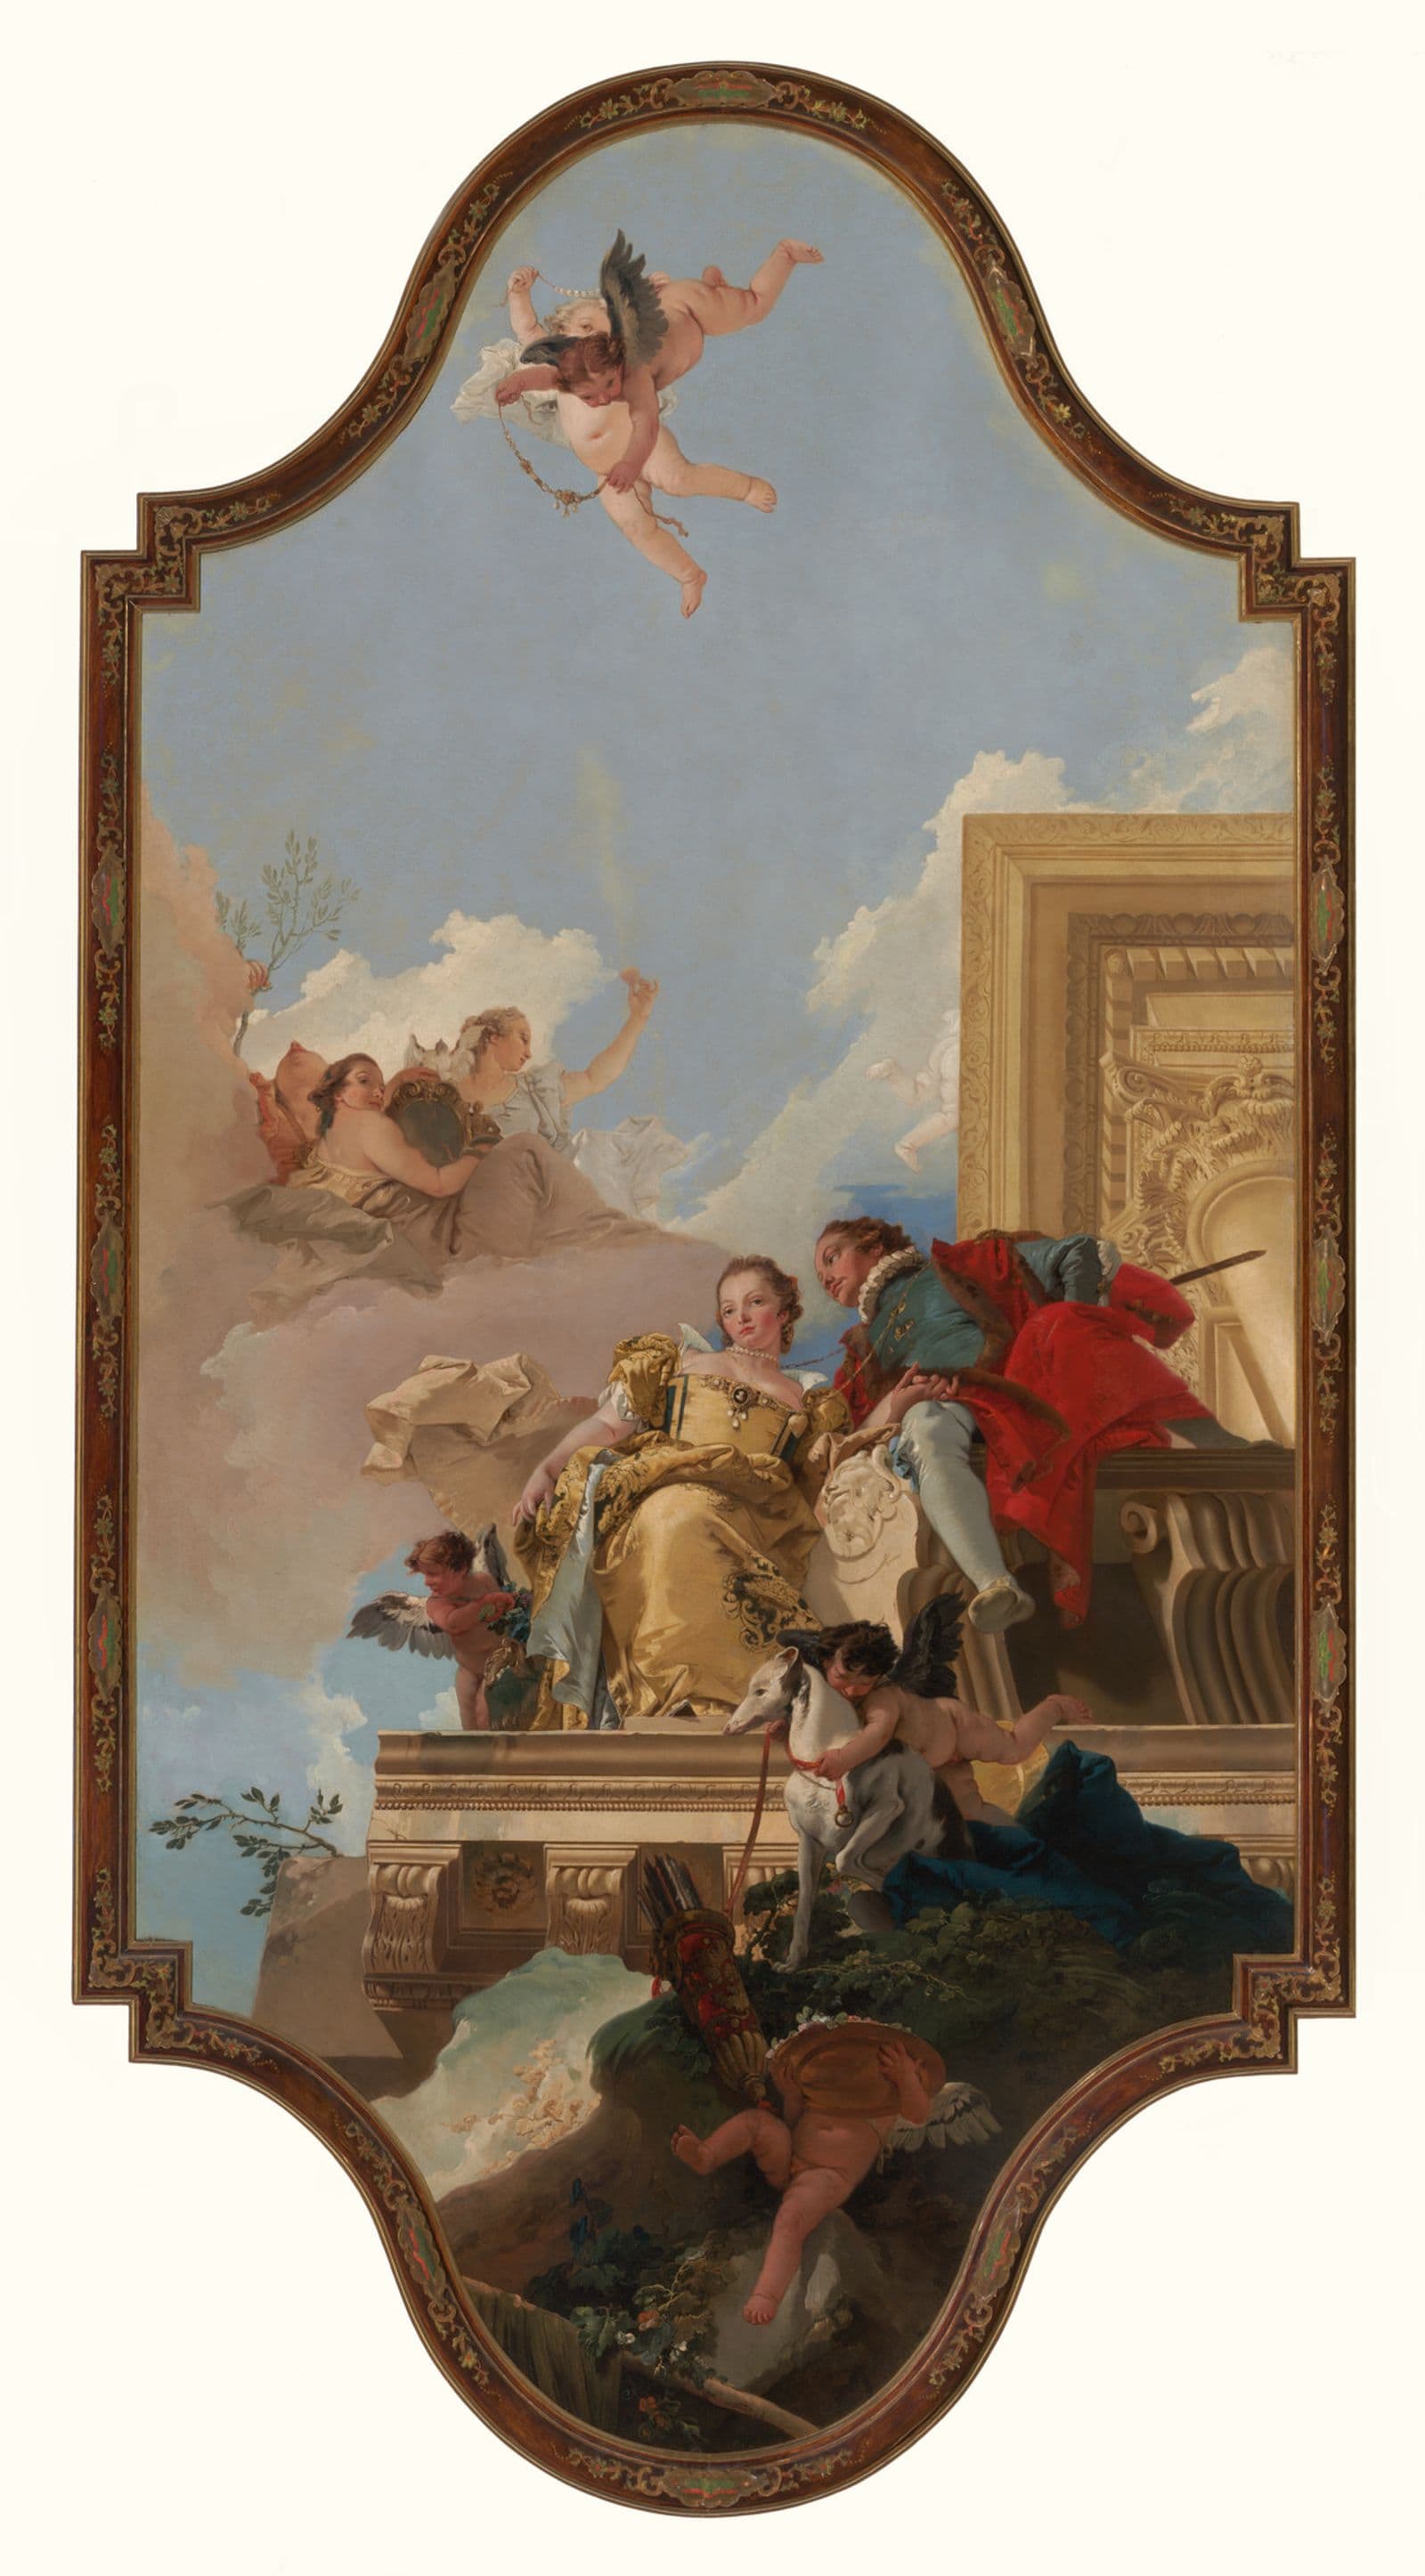 Renaissance painting featuring a marriage scene set in the sky with cherubs in sky